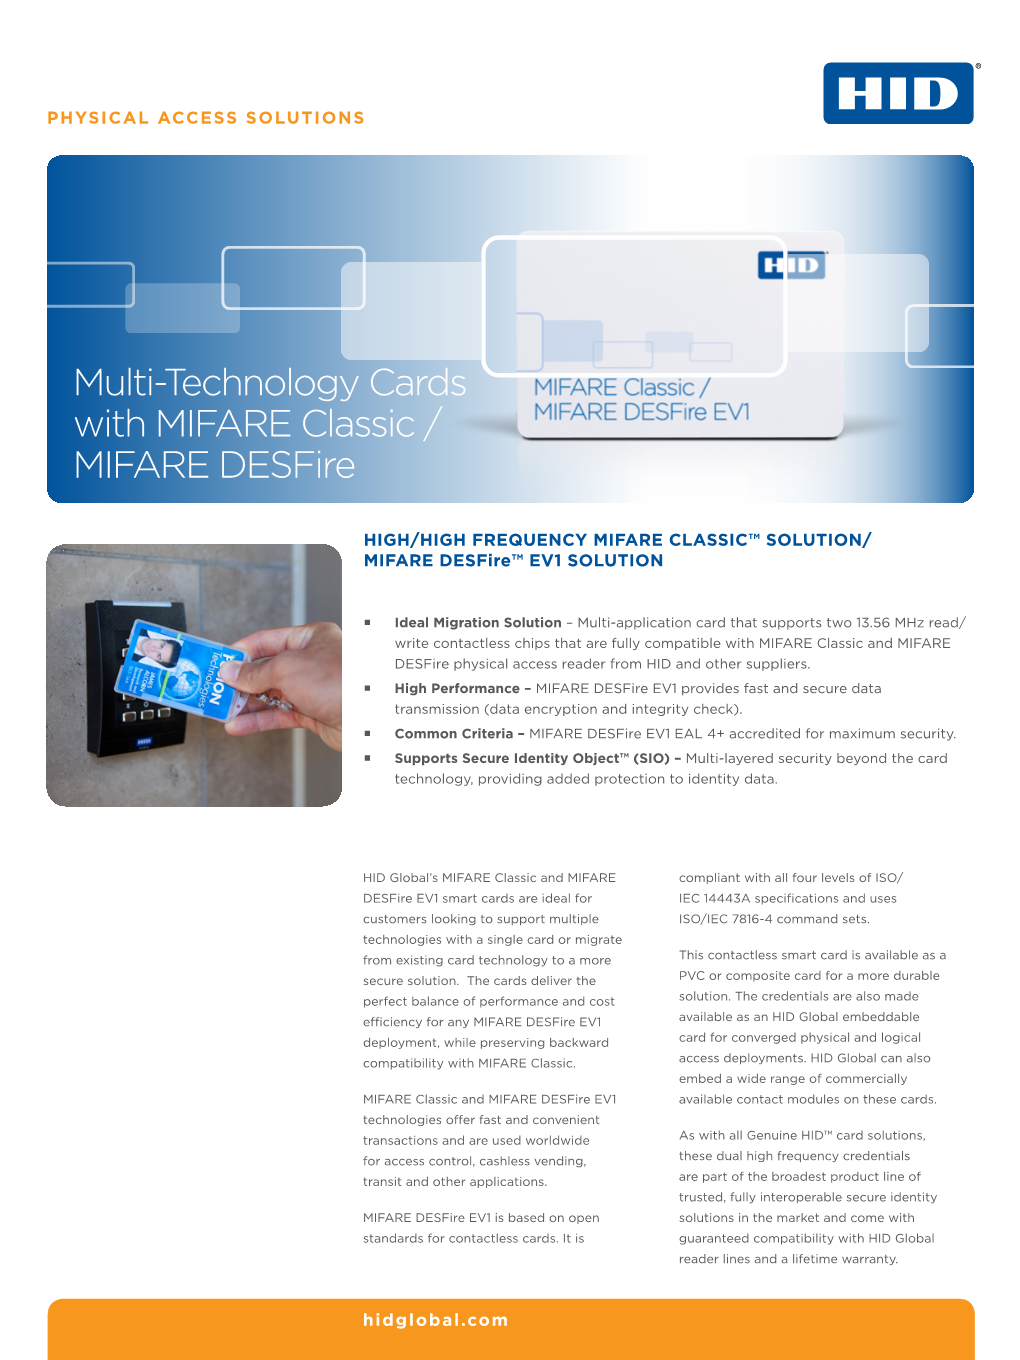 Multi-Technology Cards with MIFARE Classic / MIFARE Desfire